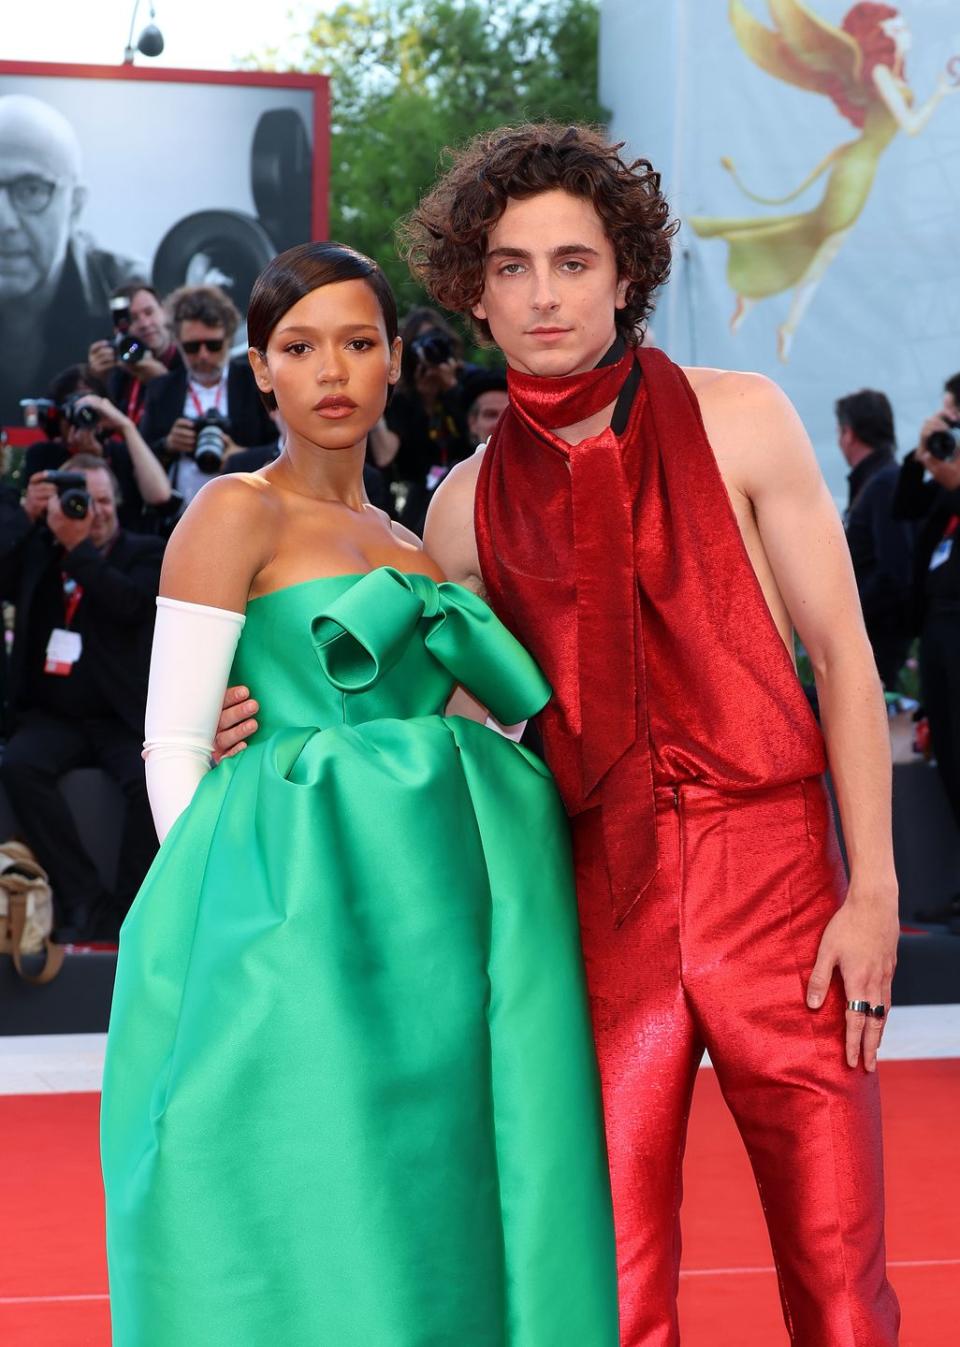 Are Timothée Chalamet and Bones And All costar Taylor Russell dating?